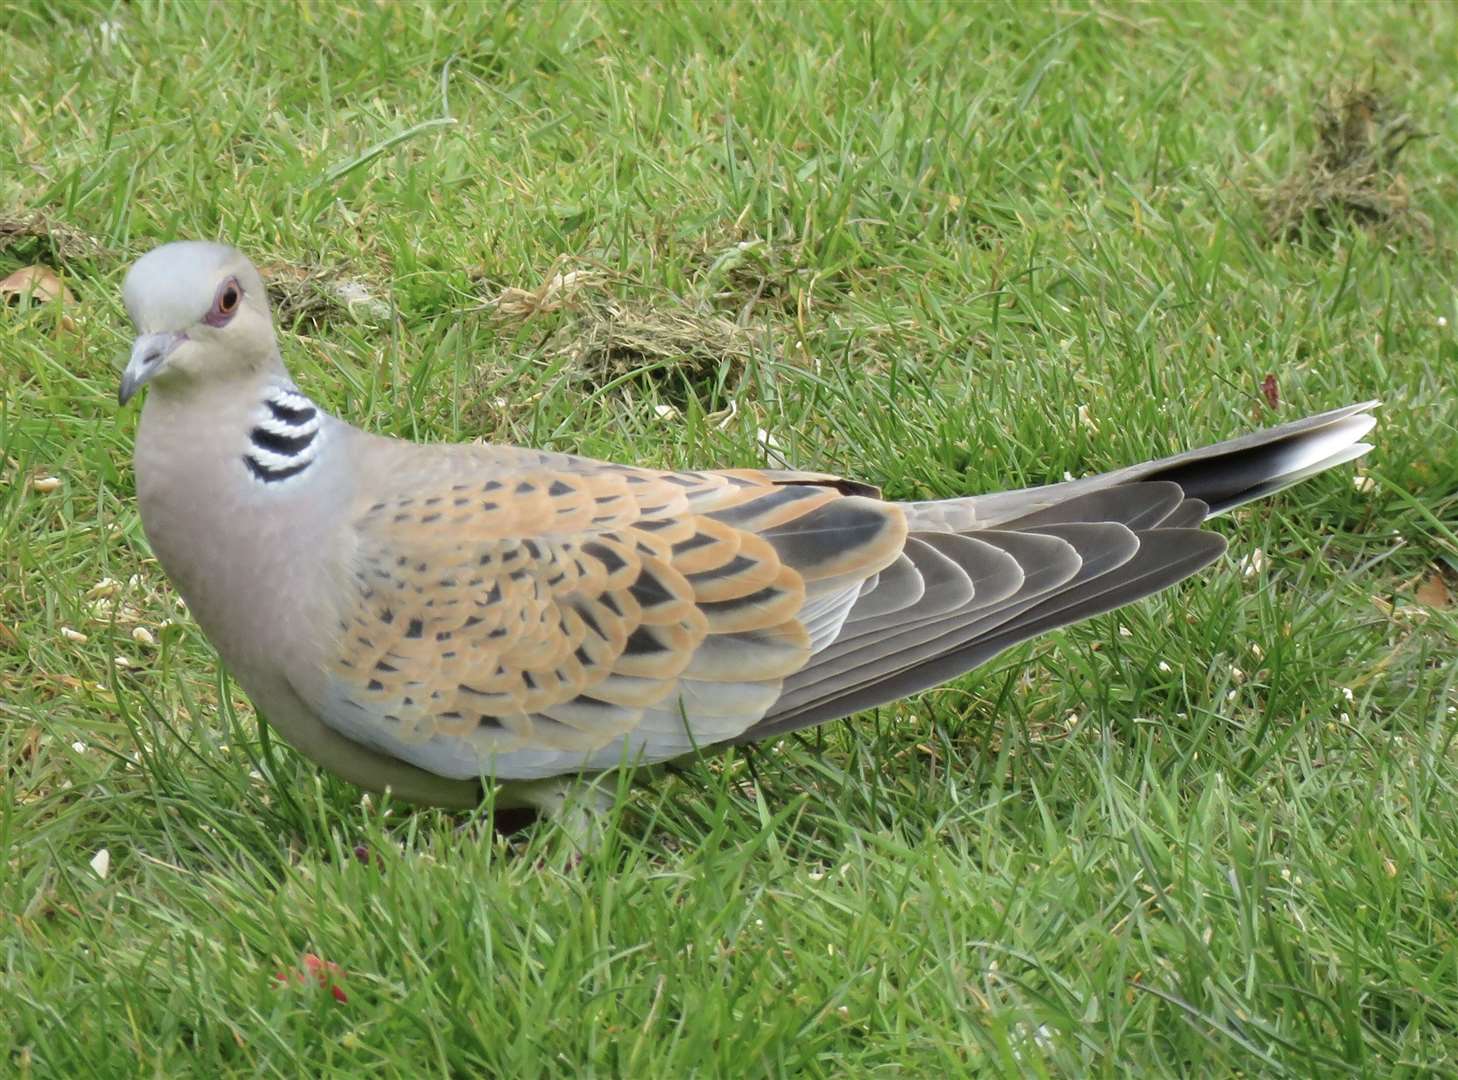 John Brewin got close enough to the turtle dove to photograph it